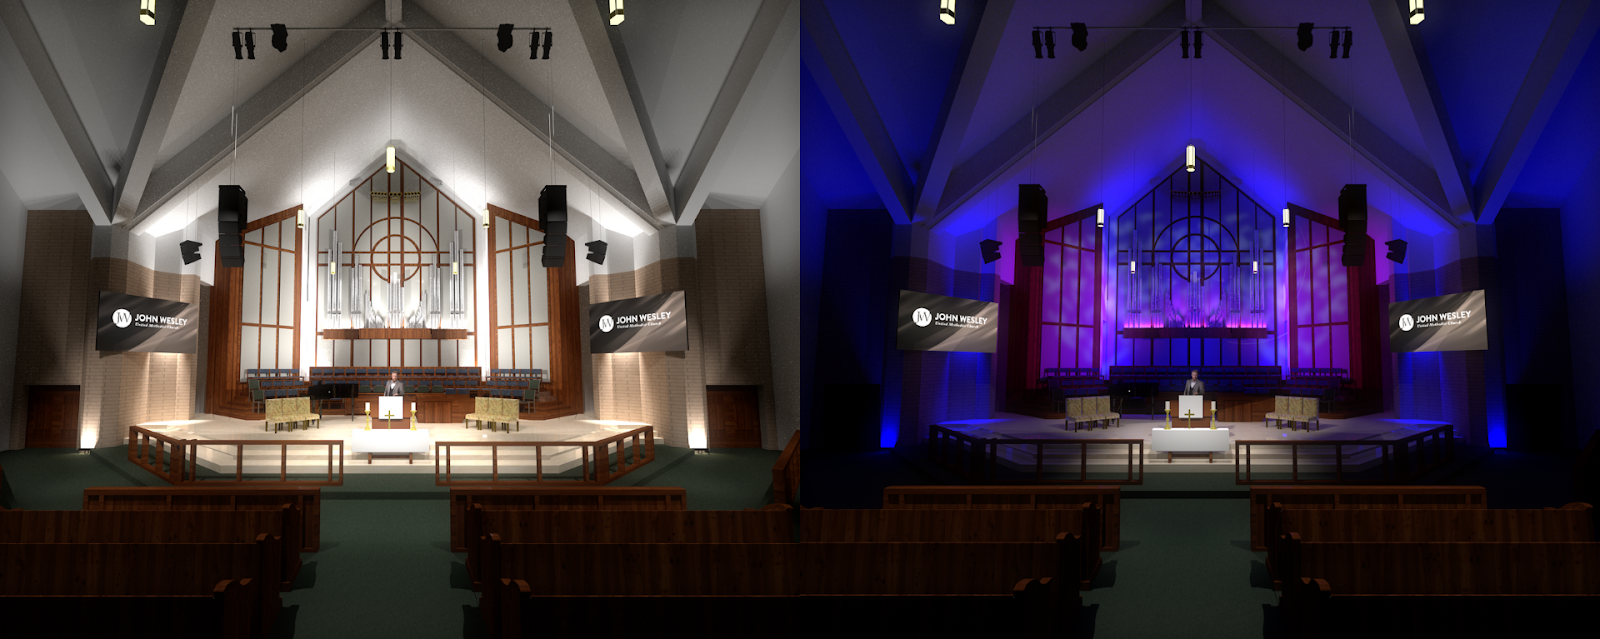 Lighting for Worship - Best Practices